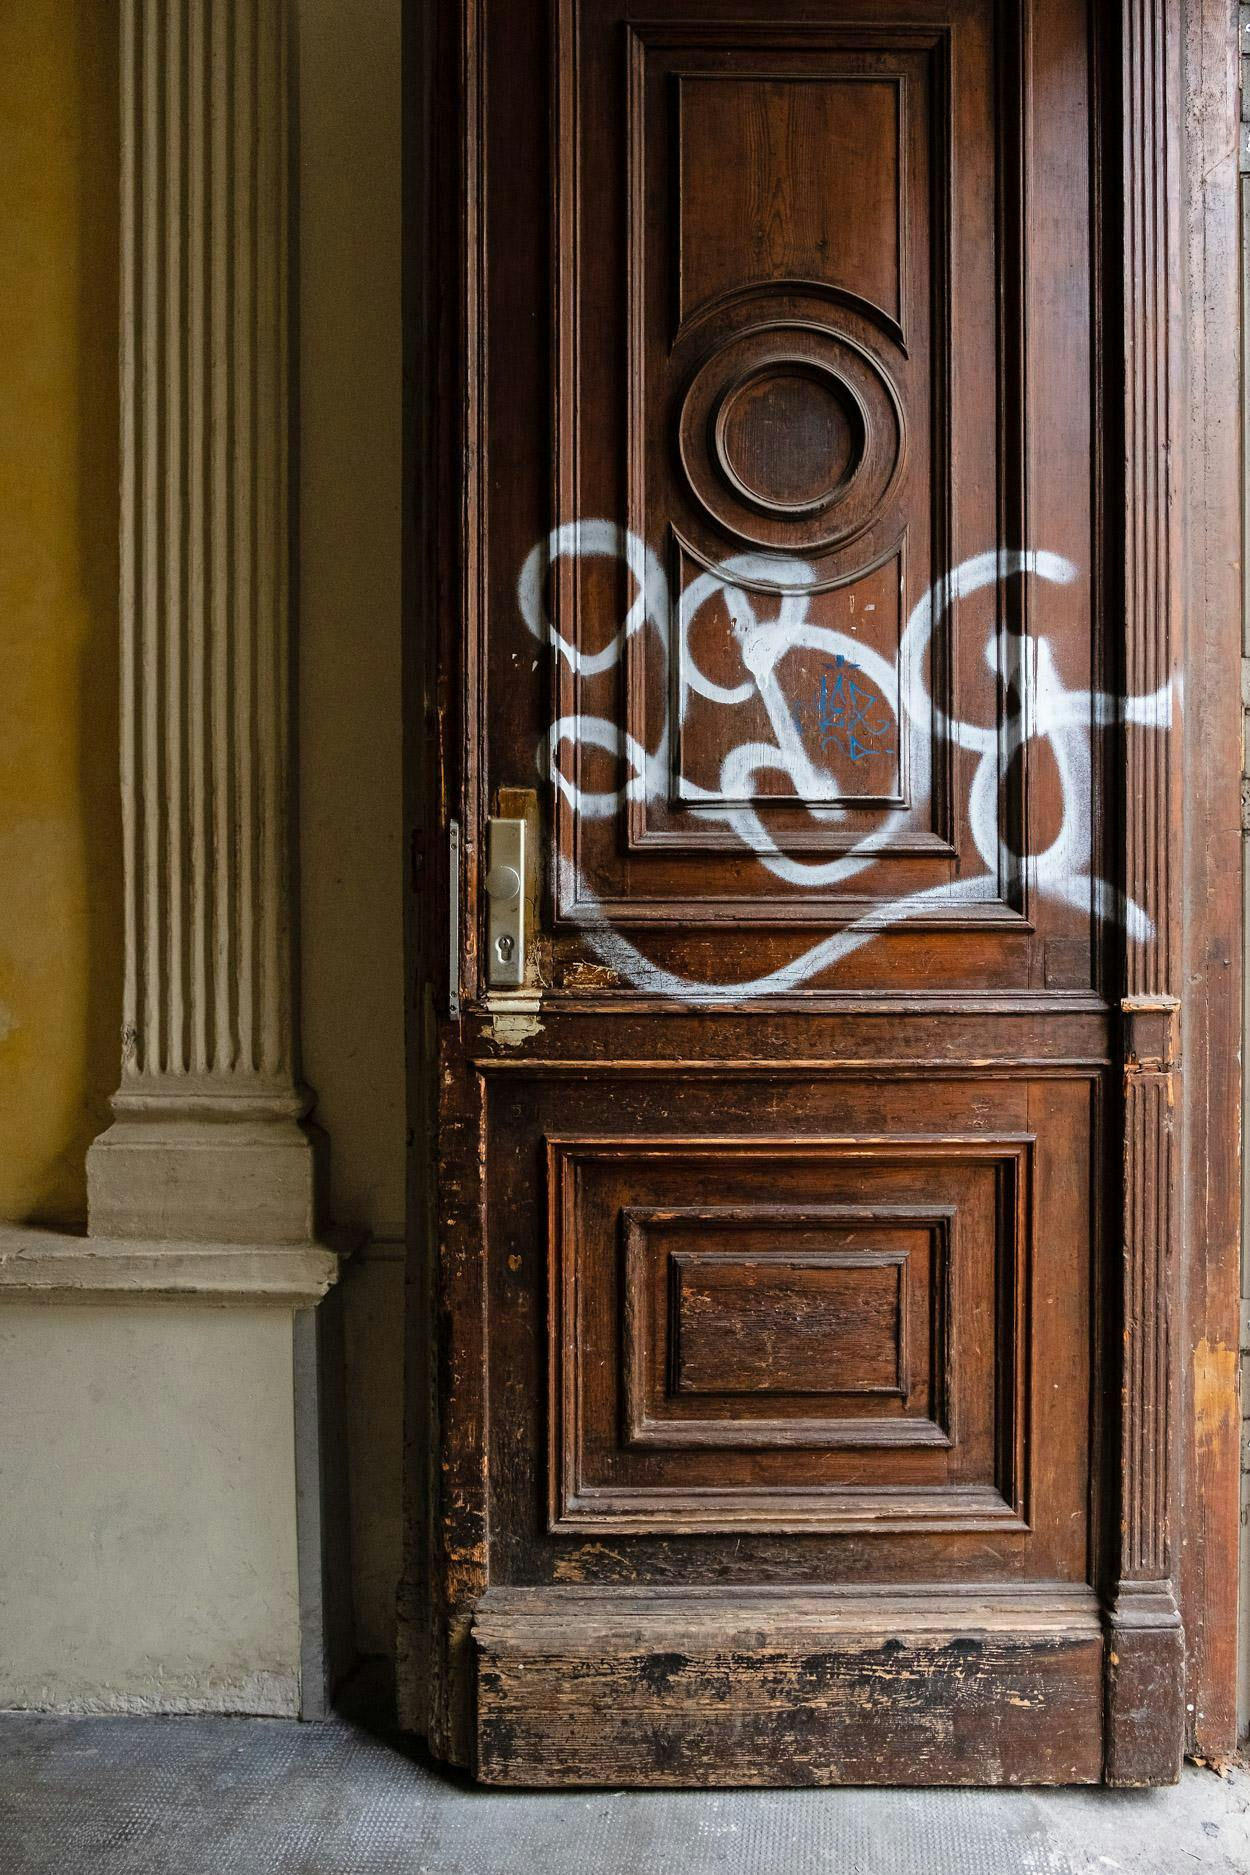 The image features a large wooden door with a graffiti-covered "G" on it, which is open and located next to a building.